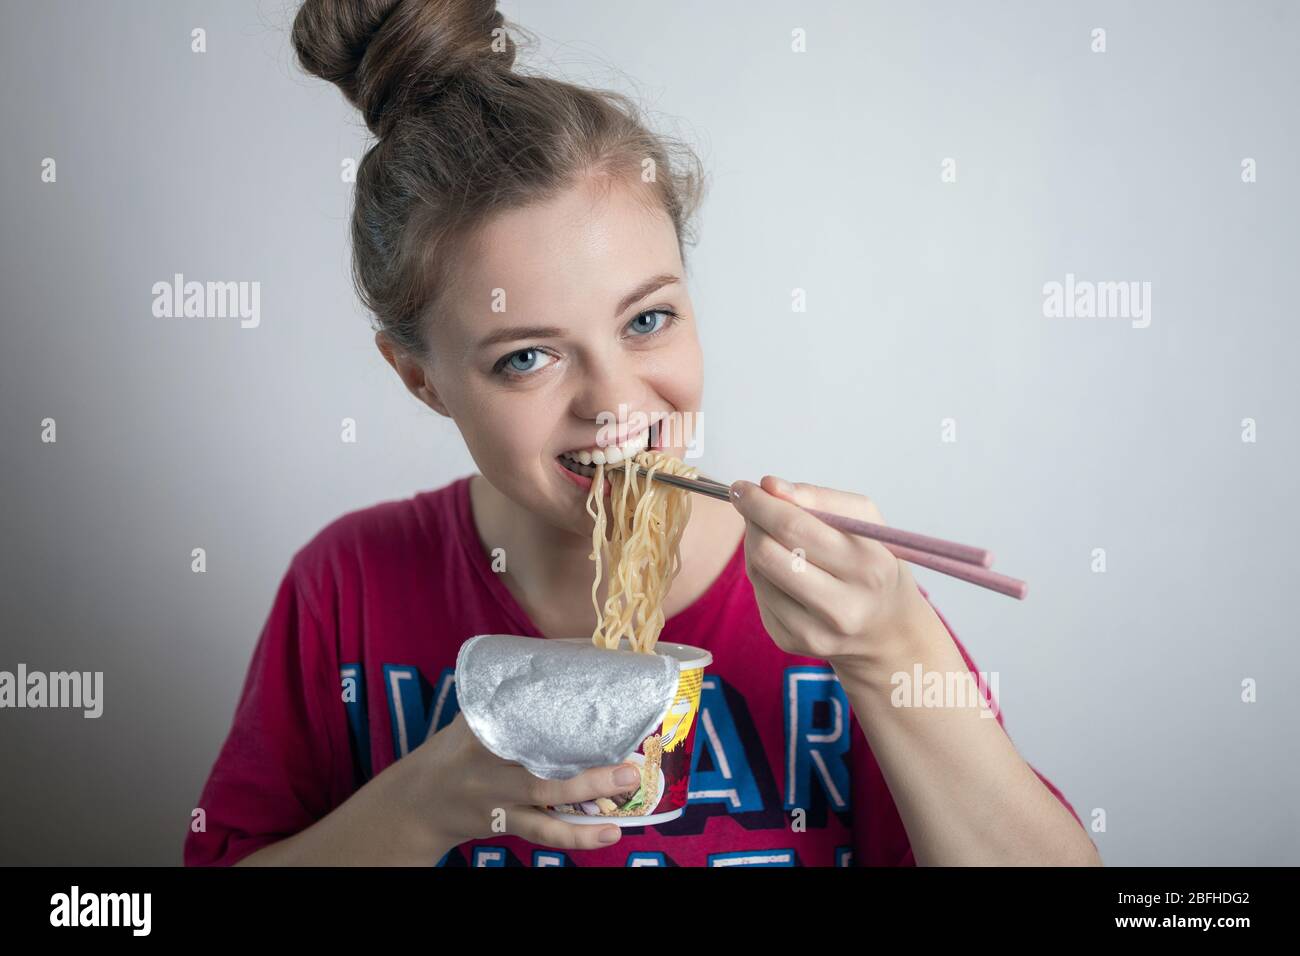 Young caucasian girl woman eating instant noodles ramen with chopsticks Stock Photo